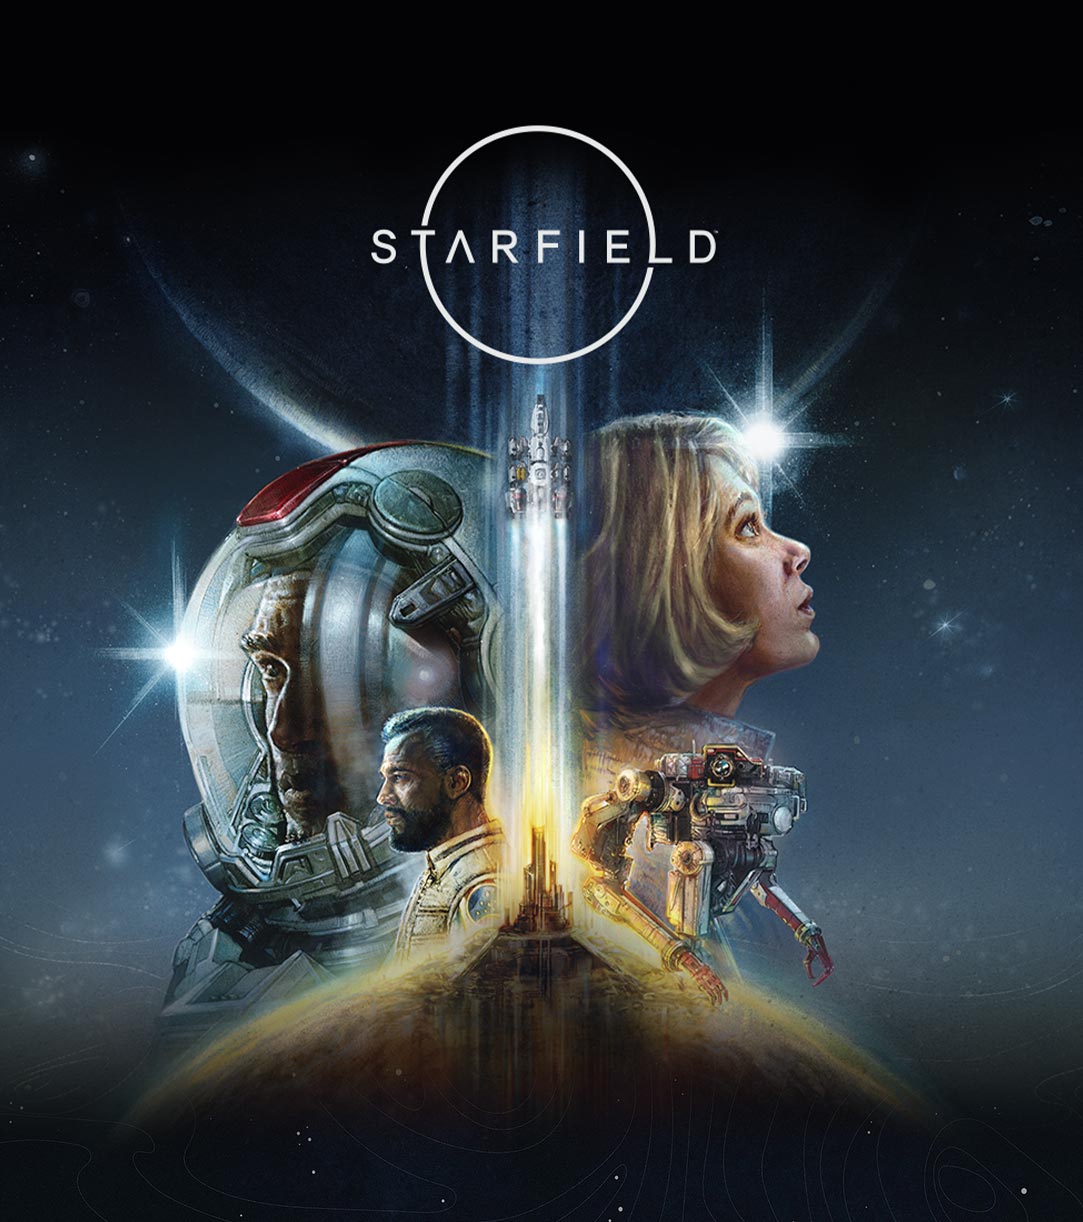 Four characters superimposed facing to the left and right side with a rocket ship taking off in the middle with a space background